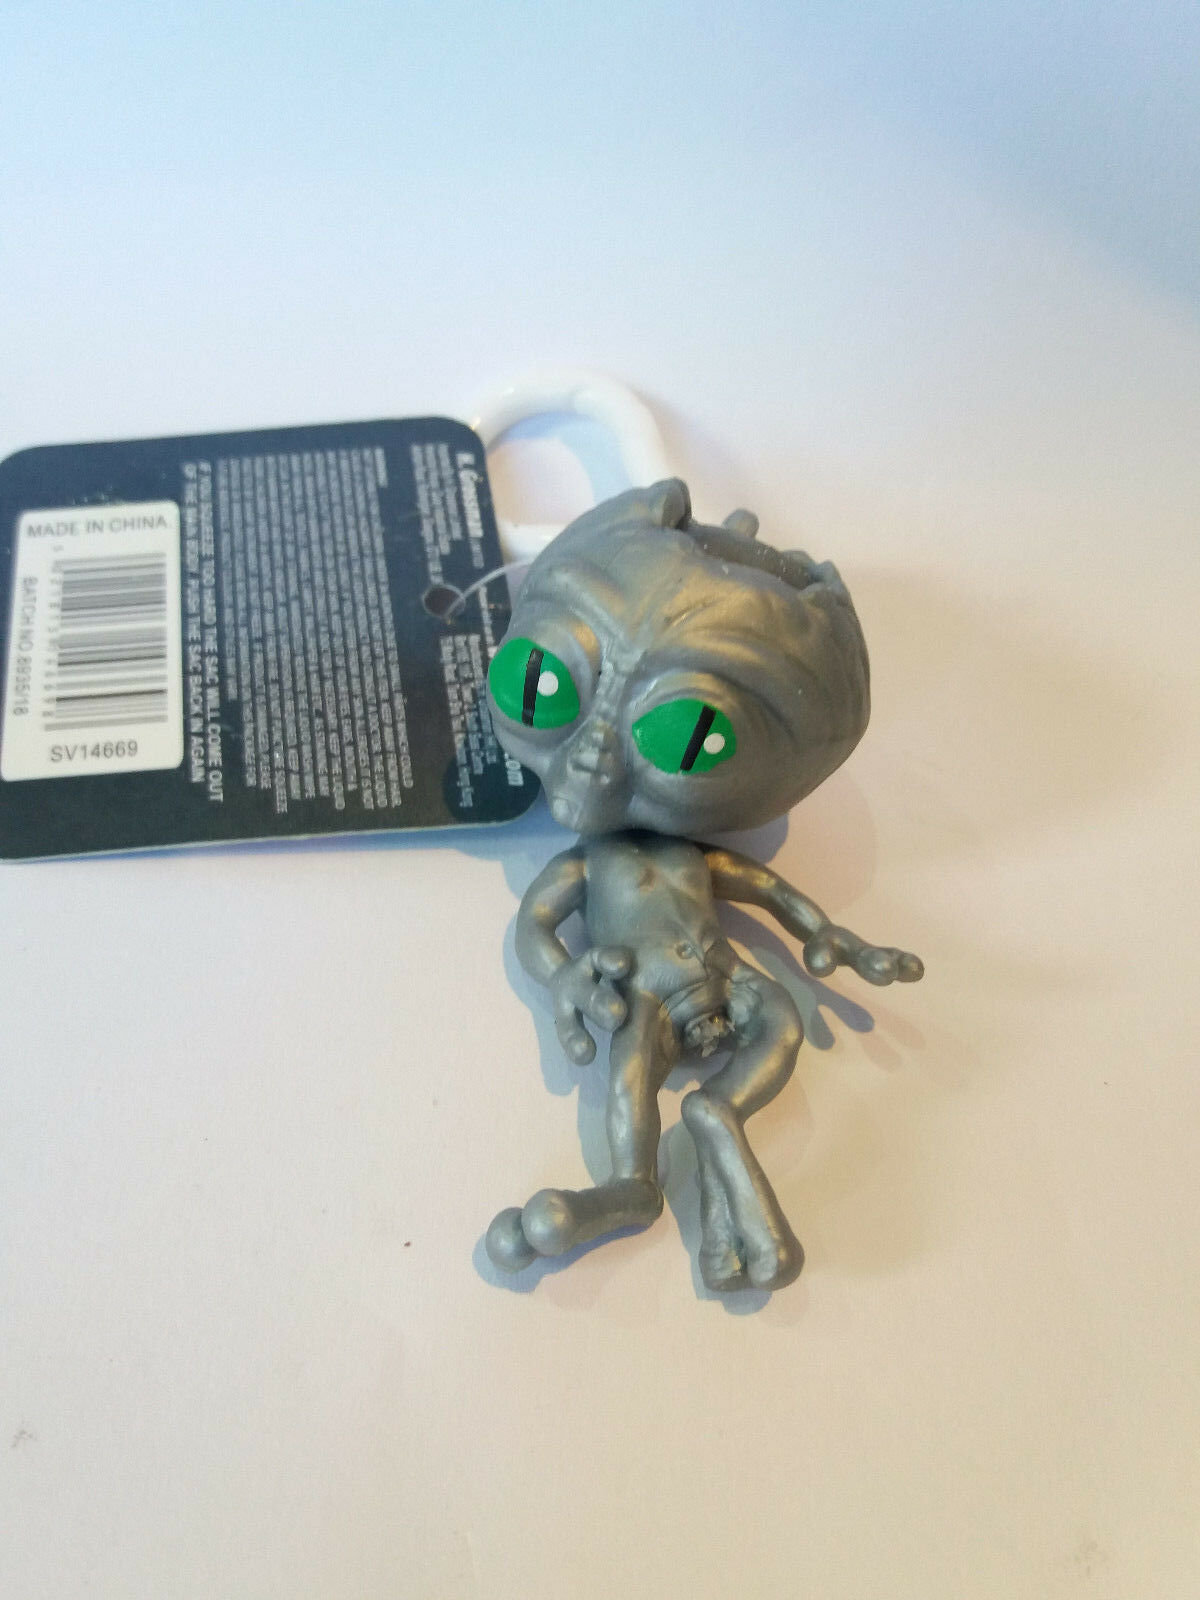 ALIEN SQUEEZE POO KEYRING SV14669 KEY CHAIN STRESS RELIEF SPACE UFO SQUIDGY 